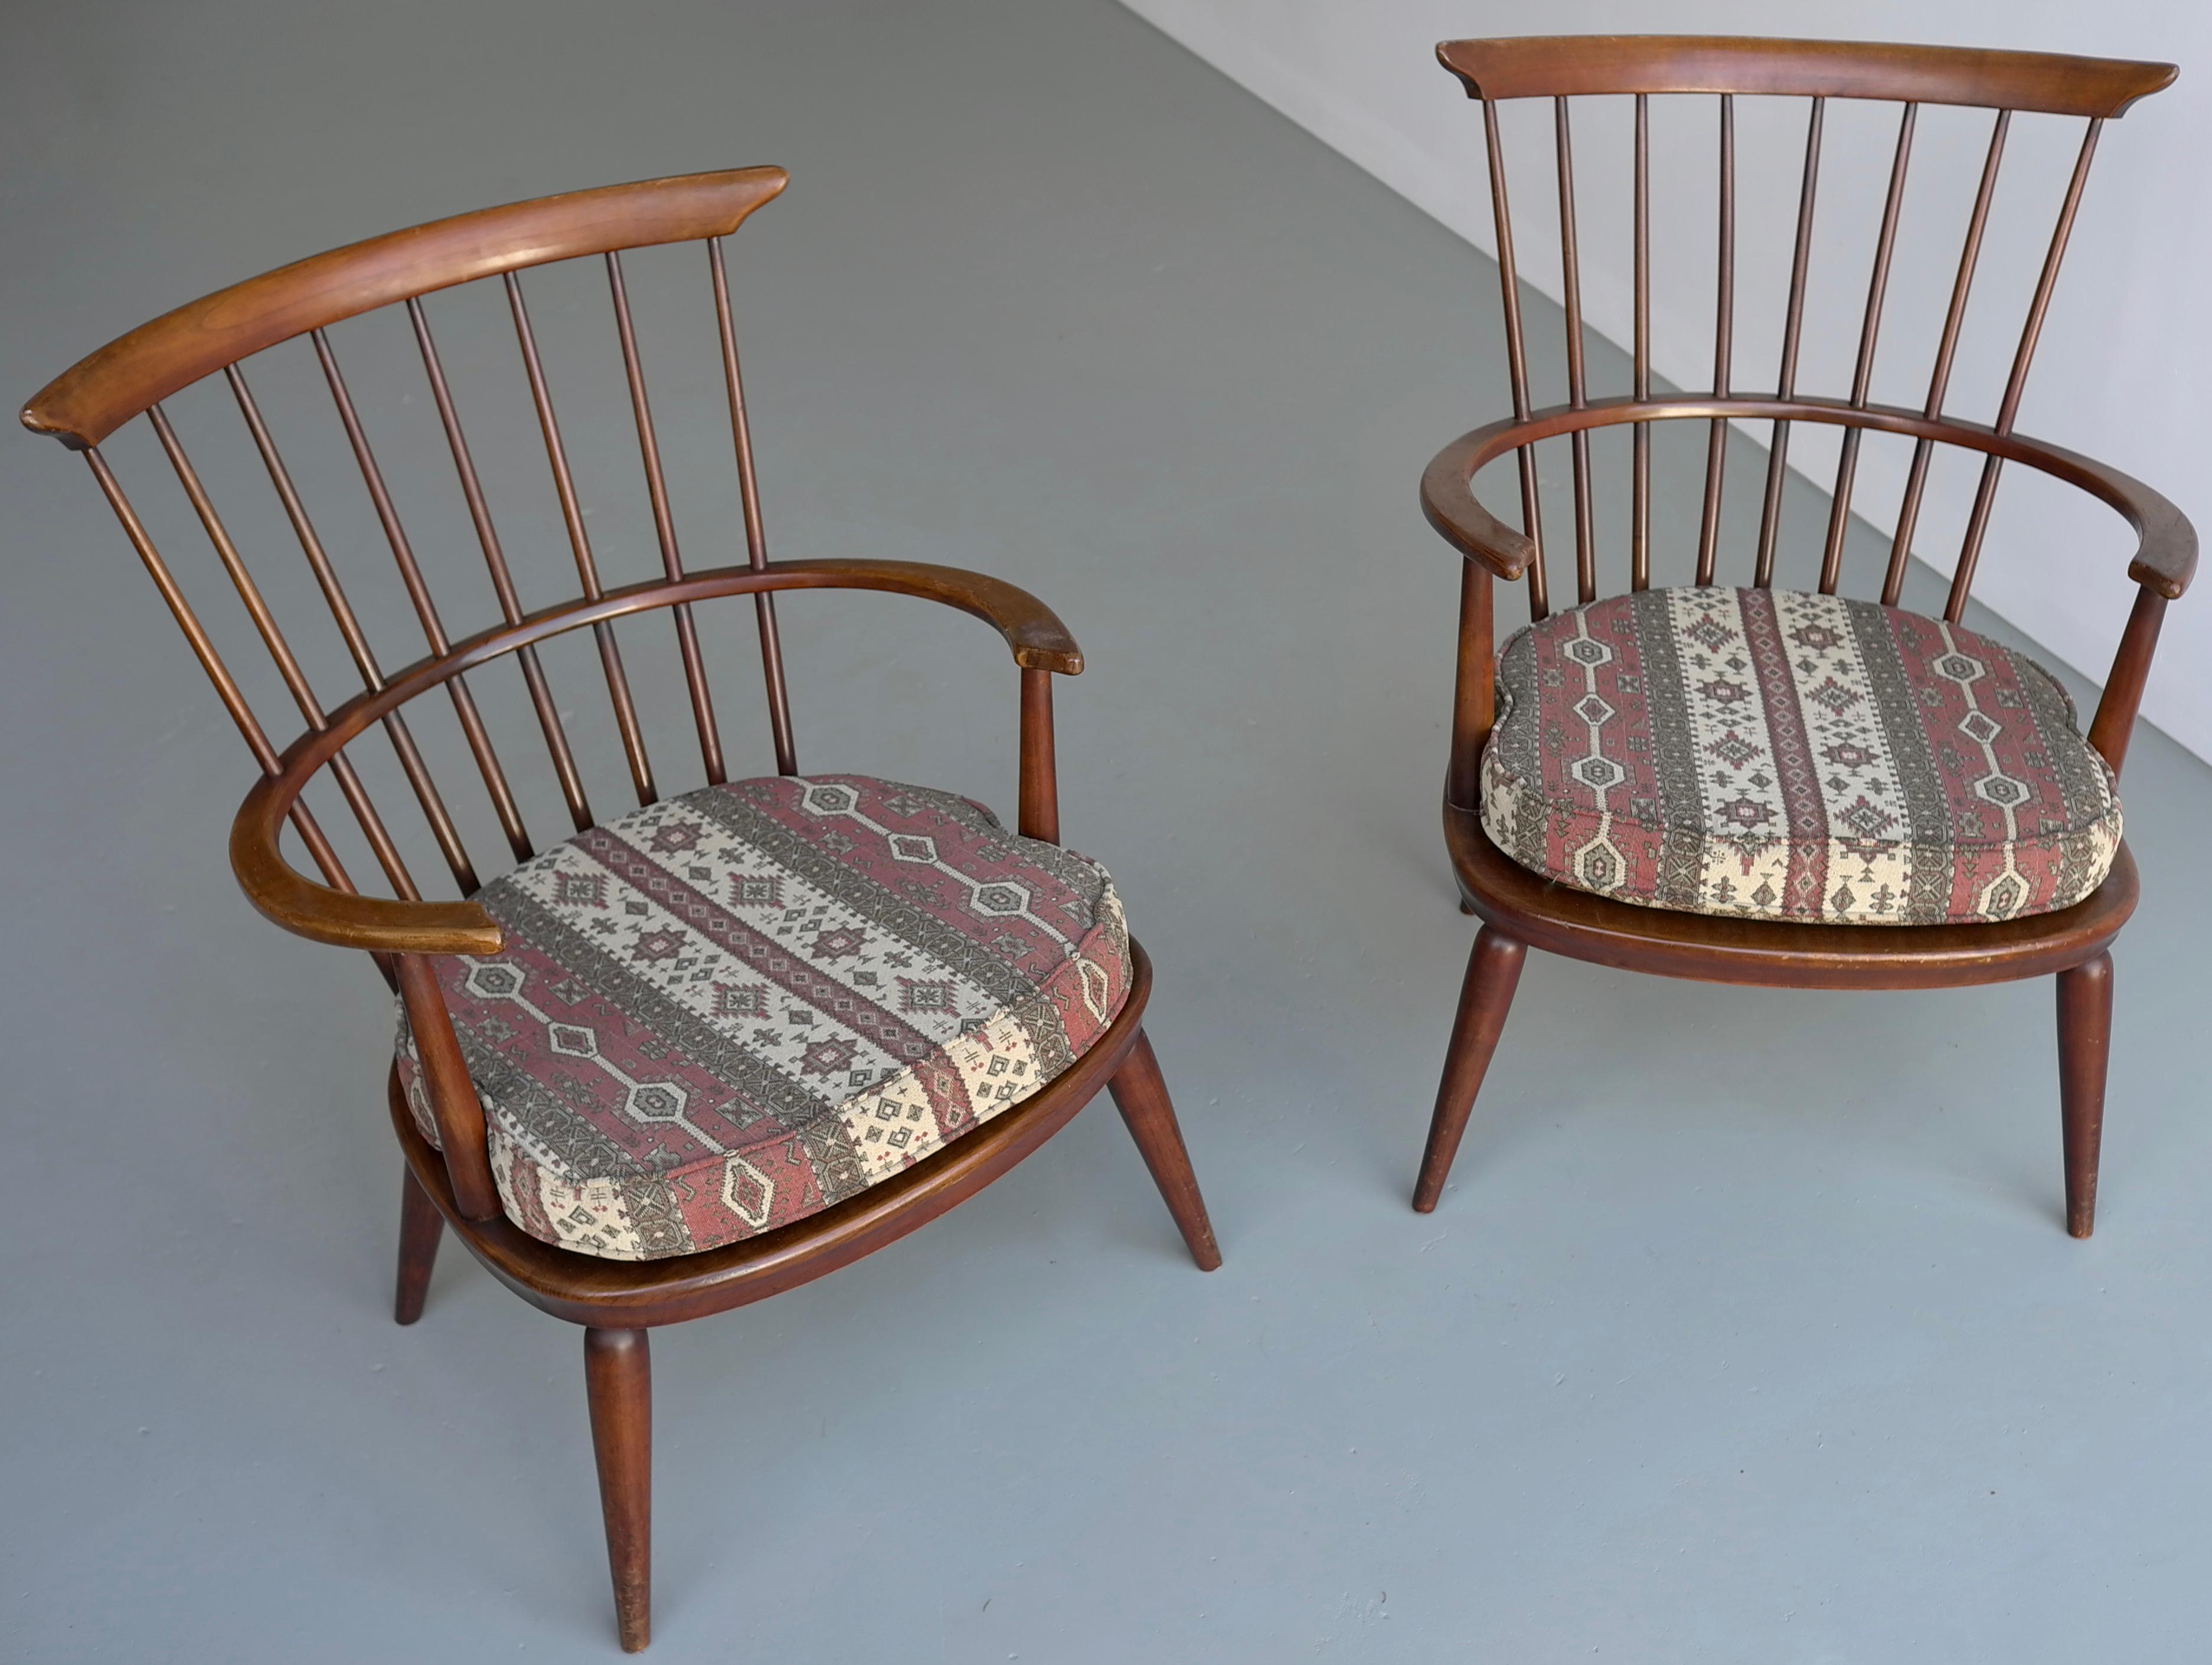 Pair of wooden Windsor armchairs by Luigi Ercolani.